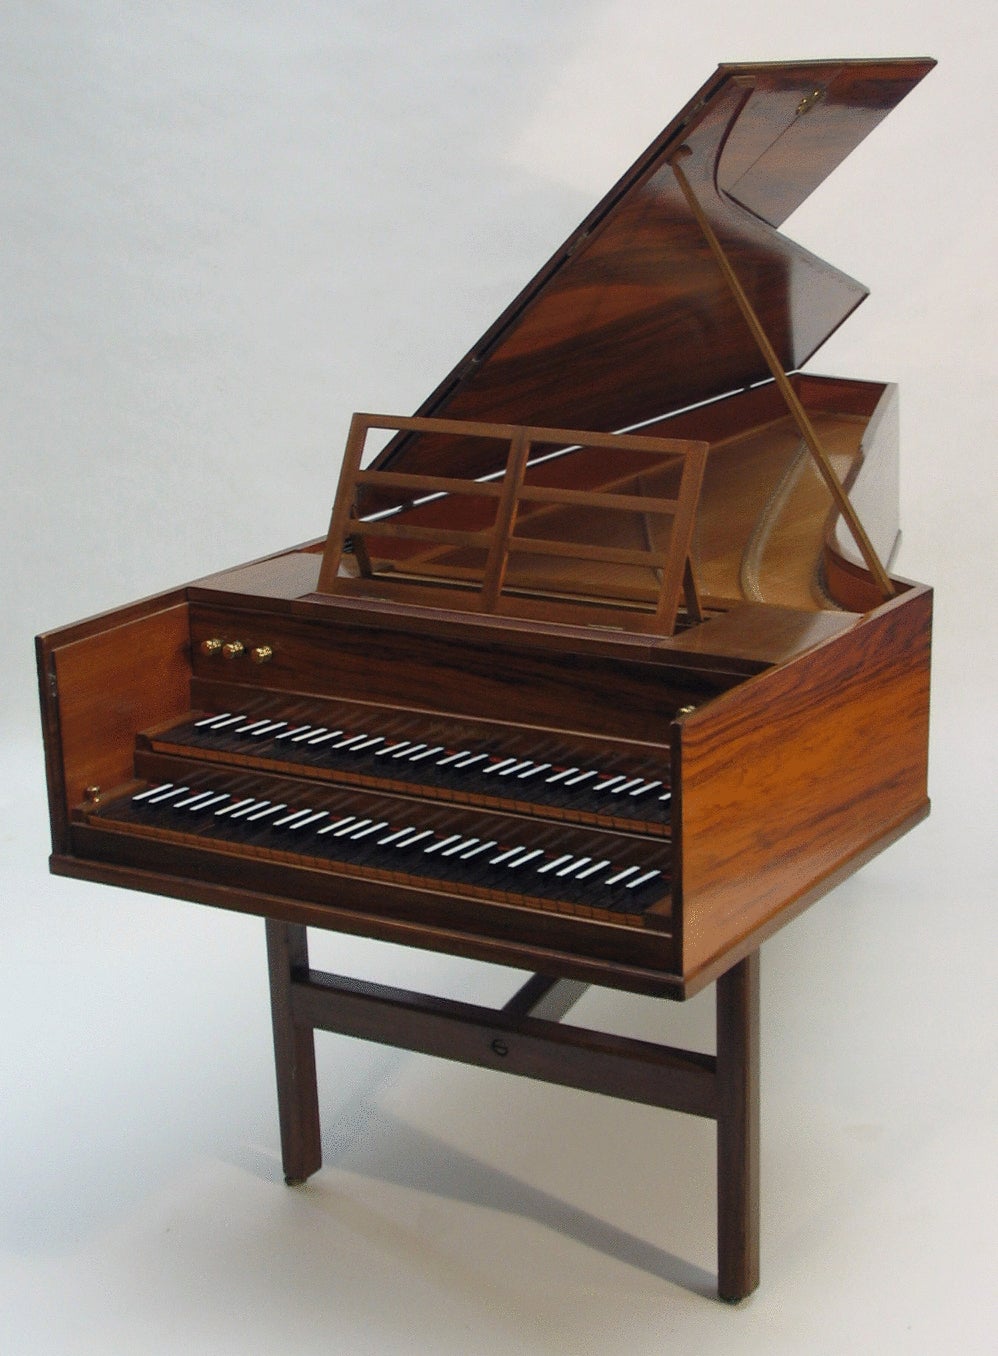 John Morley double manual harpsichord after Kirkmann, 2 x 8', 1 x 4' with lute and buff in walnut on trestle stand raised on brass casters, with hand stops. 

Compass : 5 octaves F - F .
No.116, circa 1958.

Made in England.